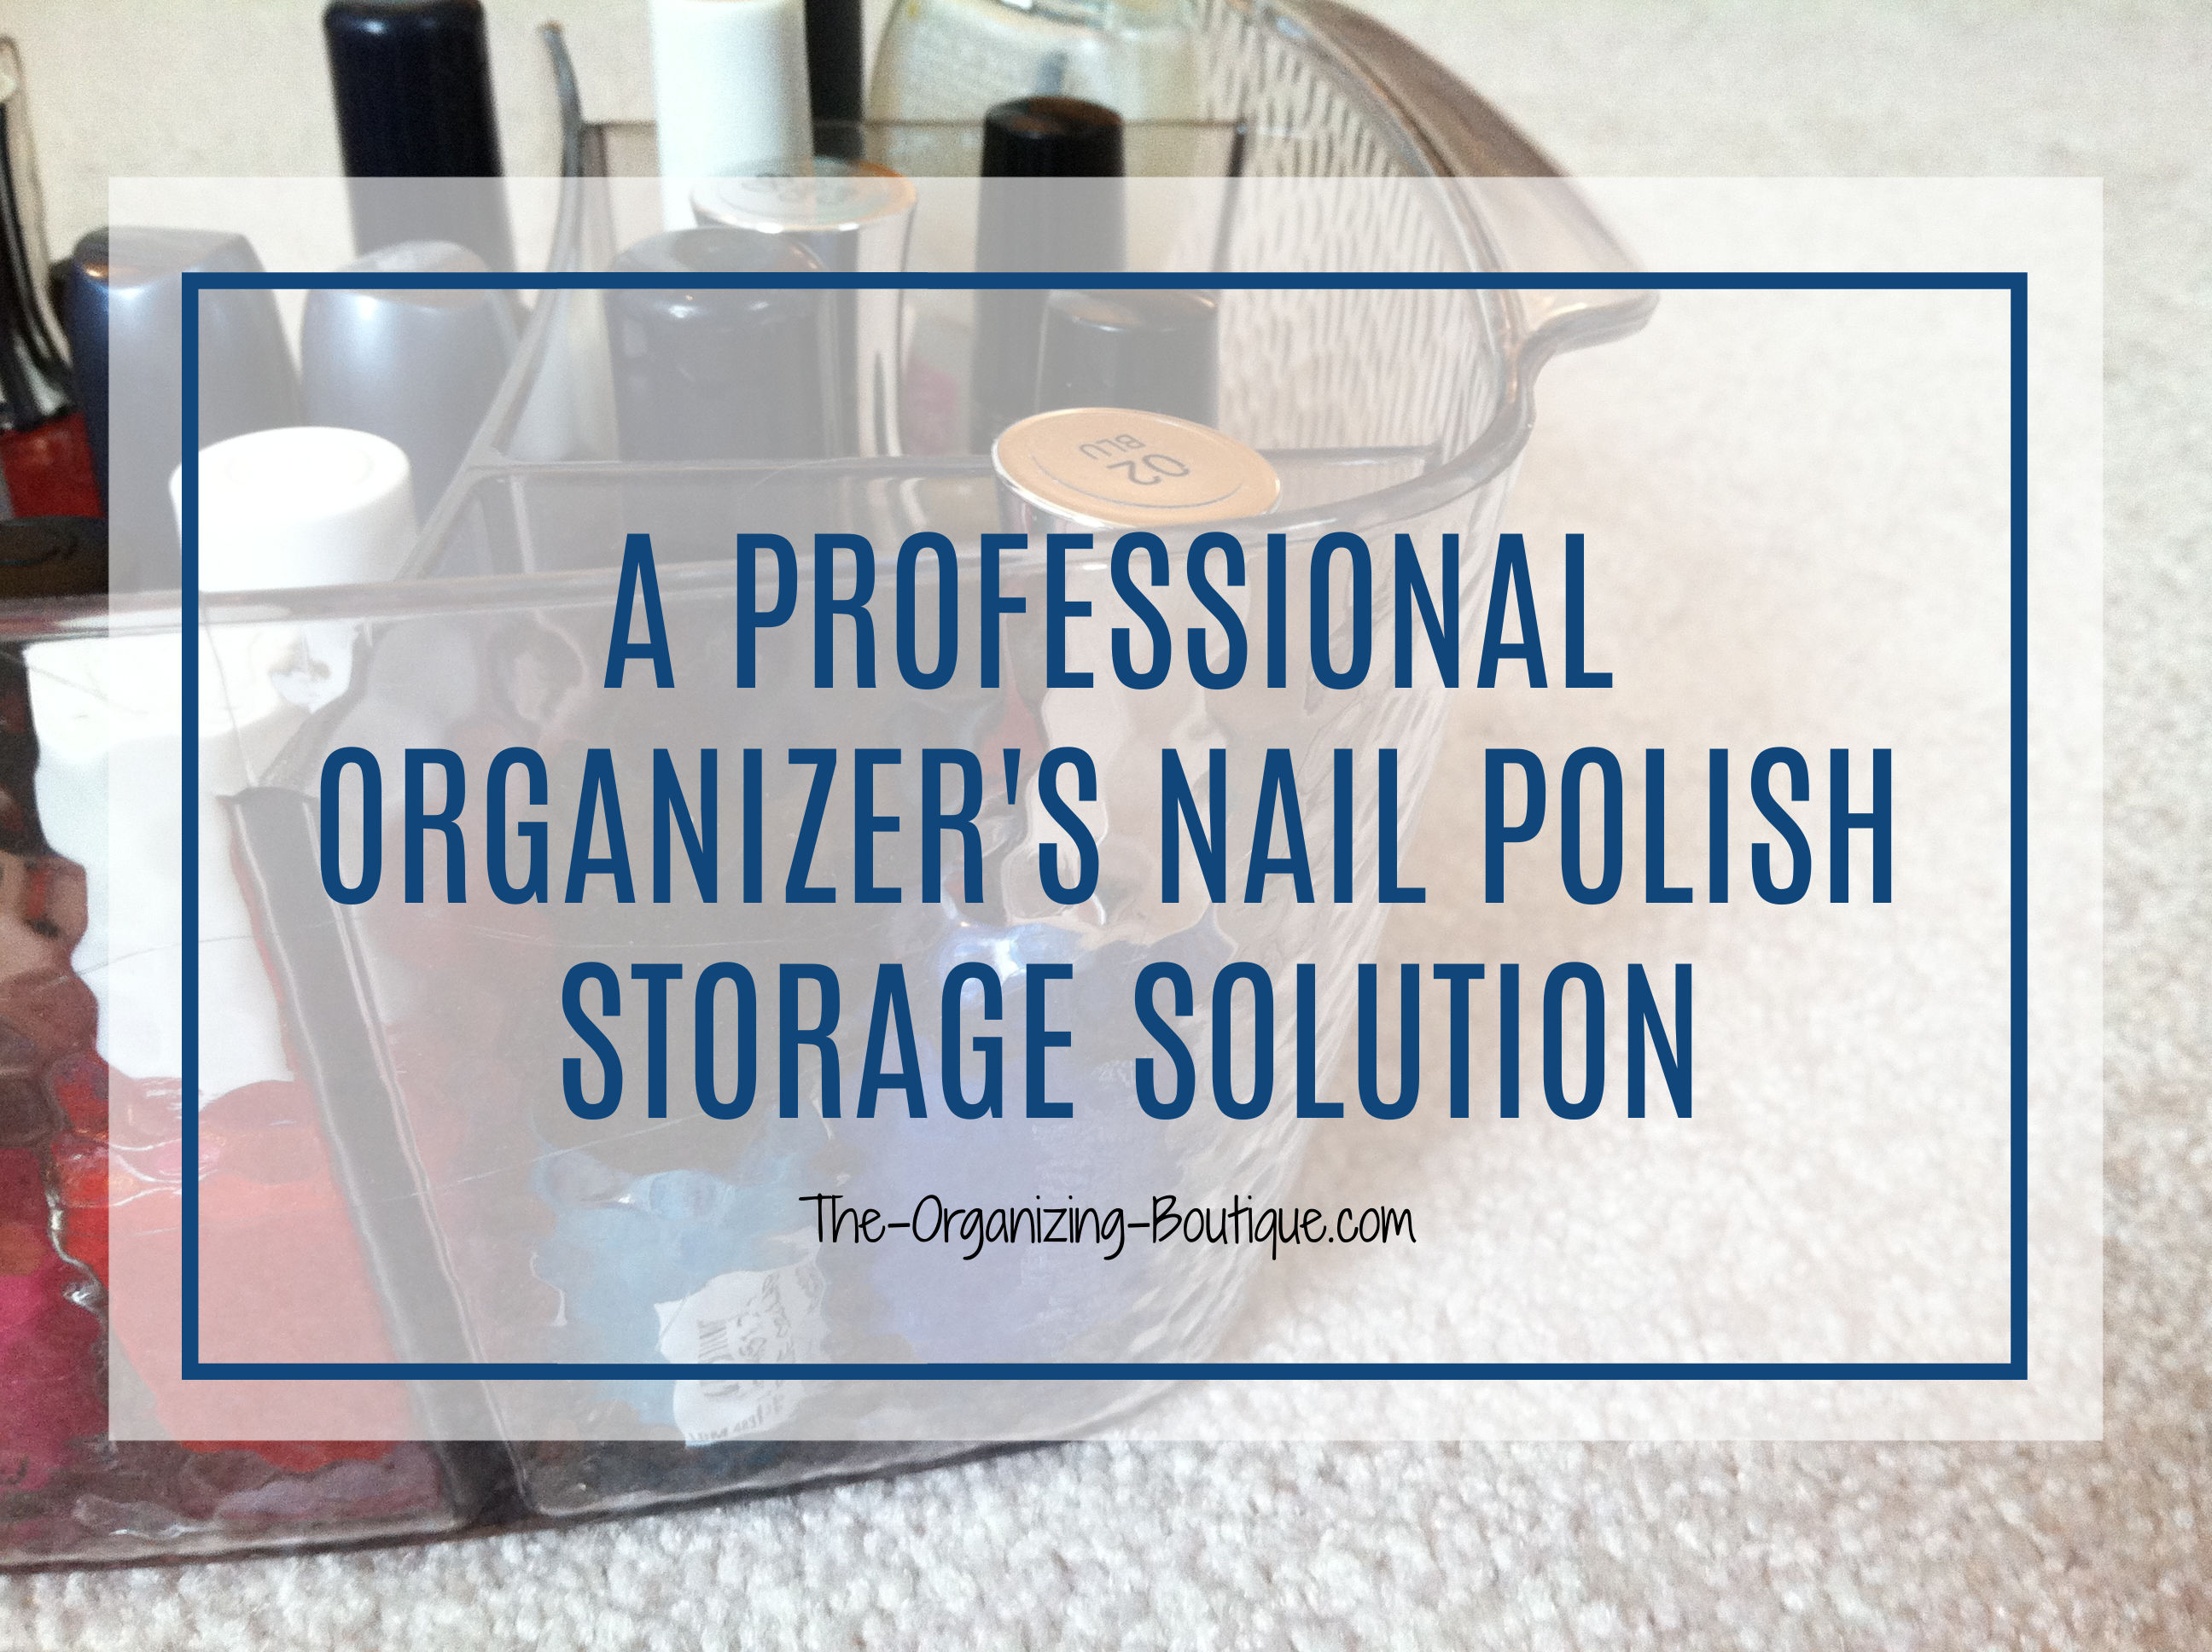 This is the nail polish organizer a professional organizer (that's me!) uses to keep her items neat and handy.